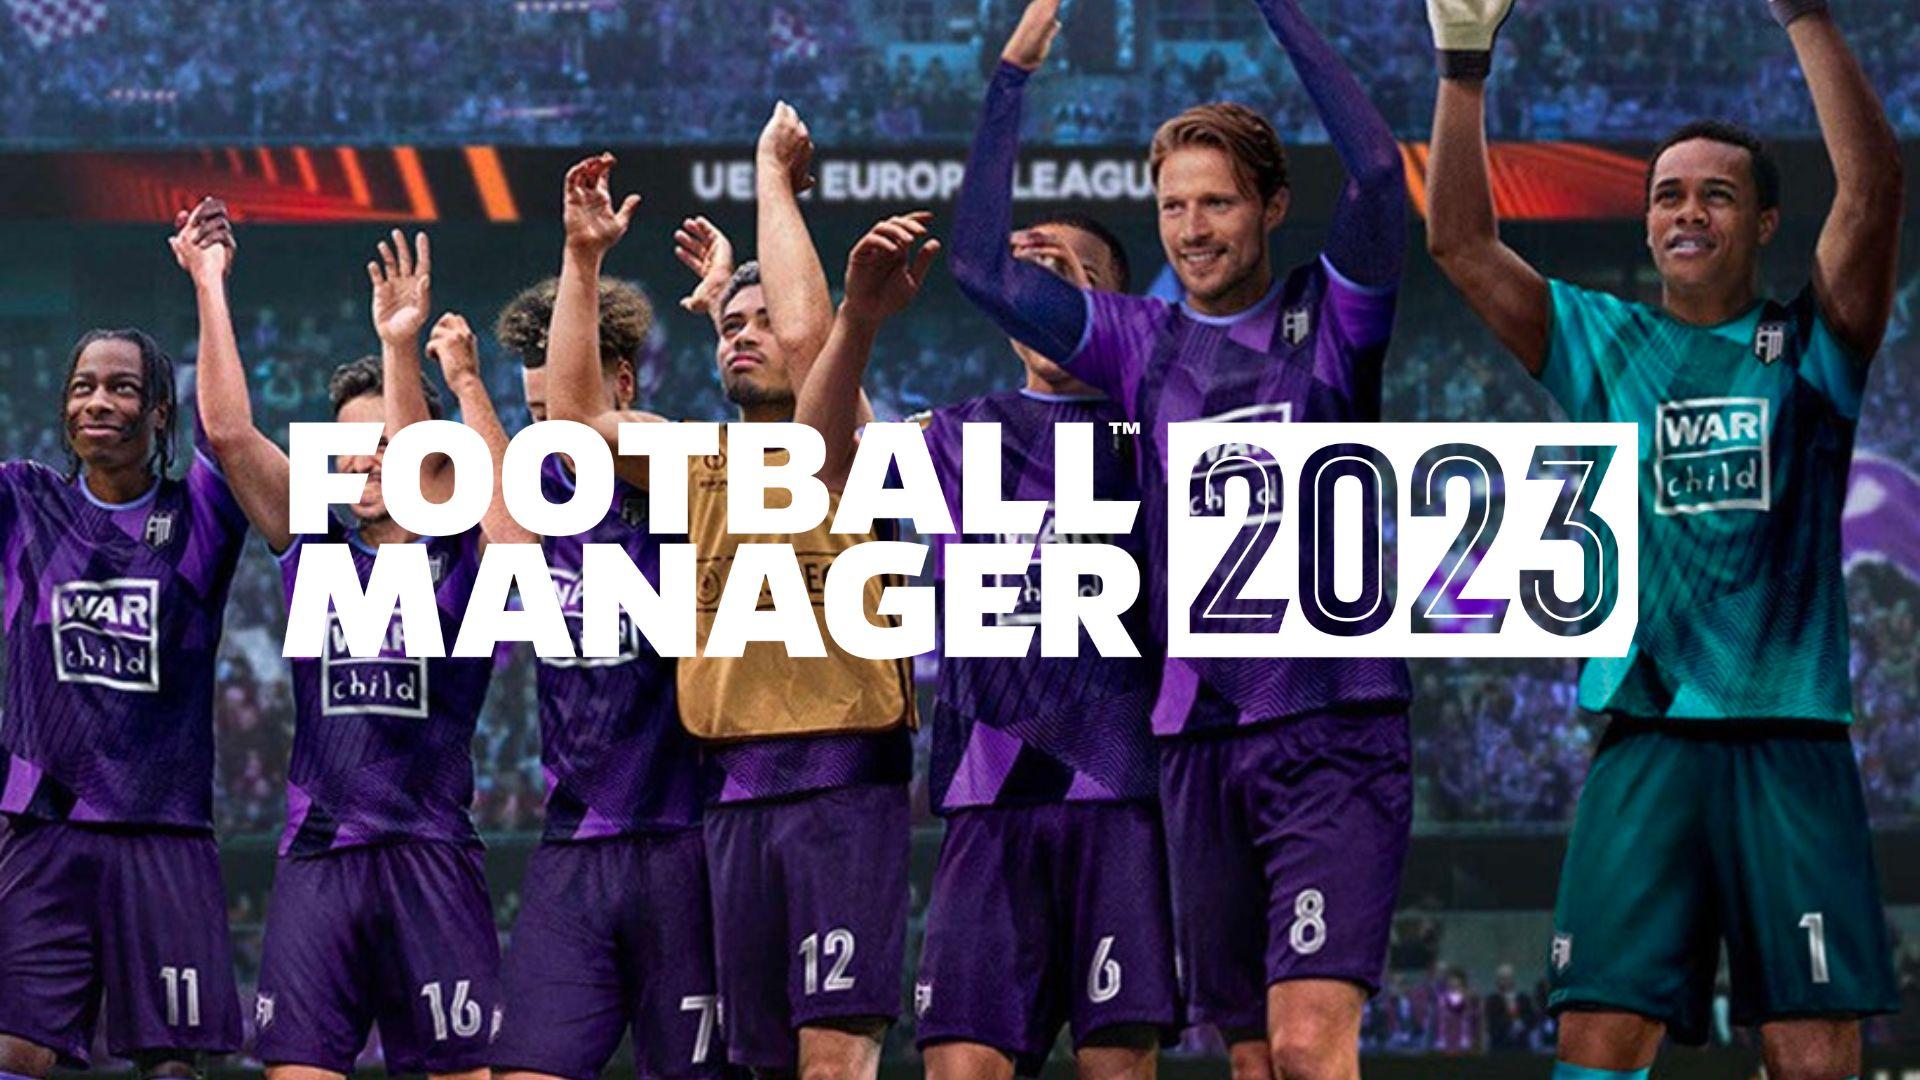 Football Manager 2023 team and logo